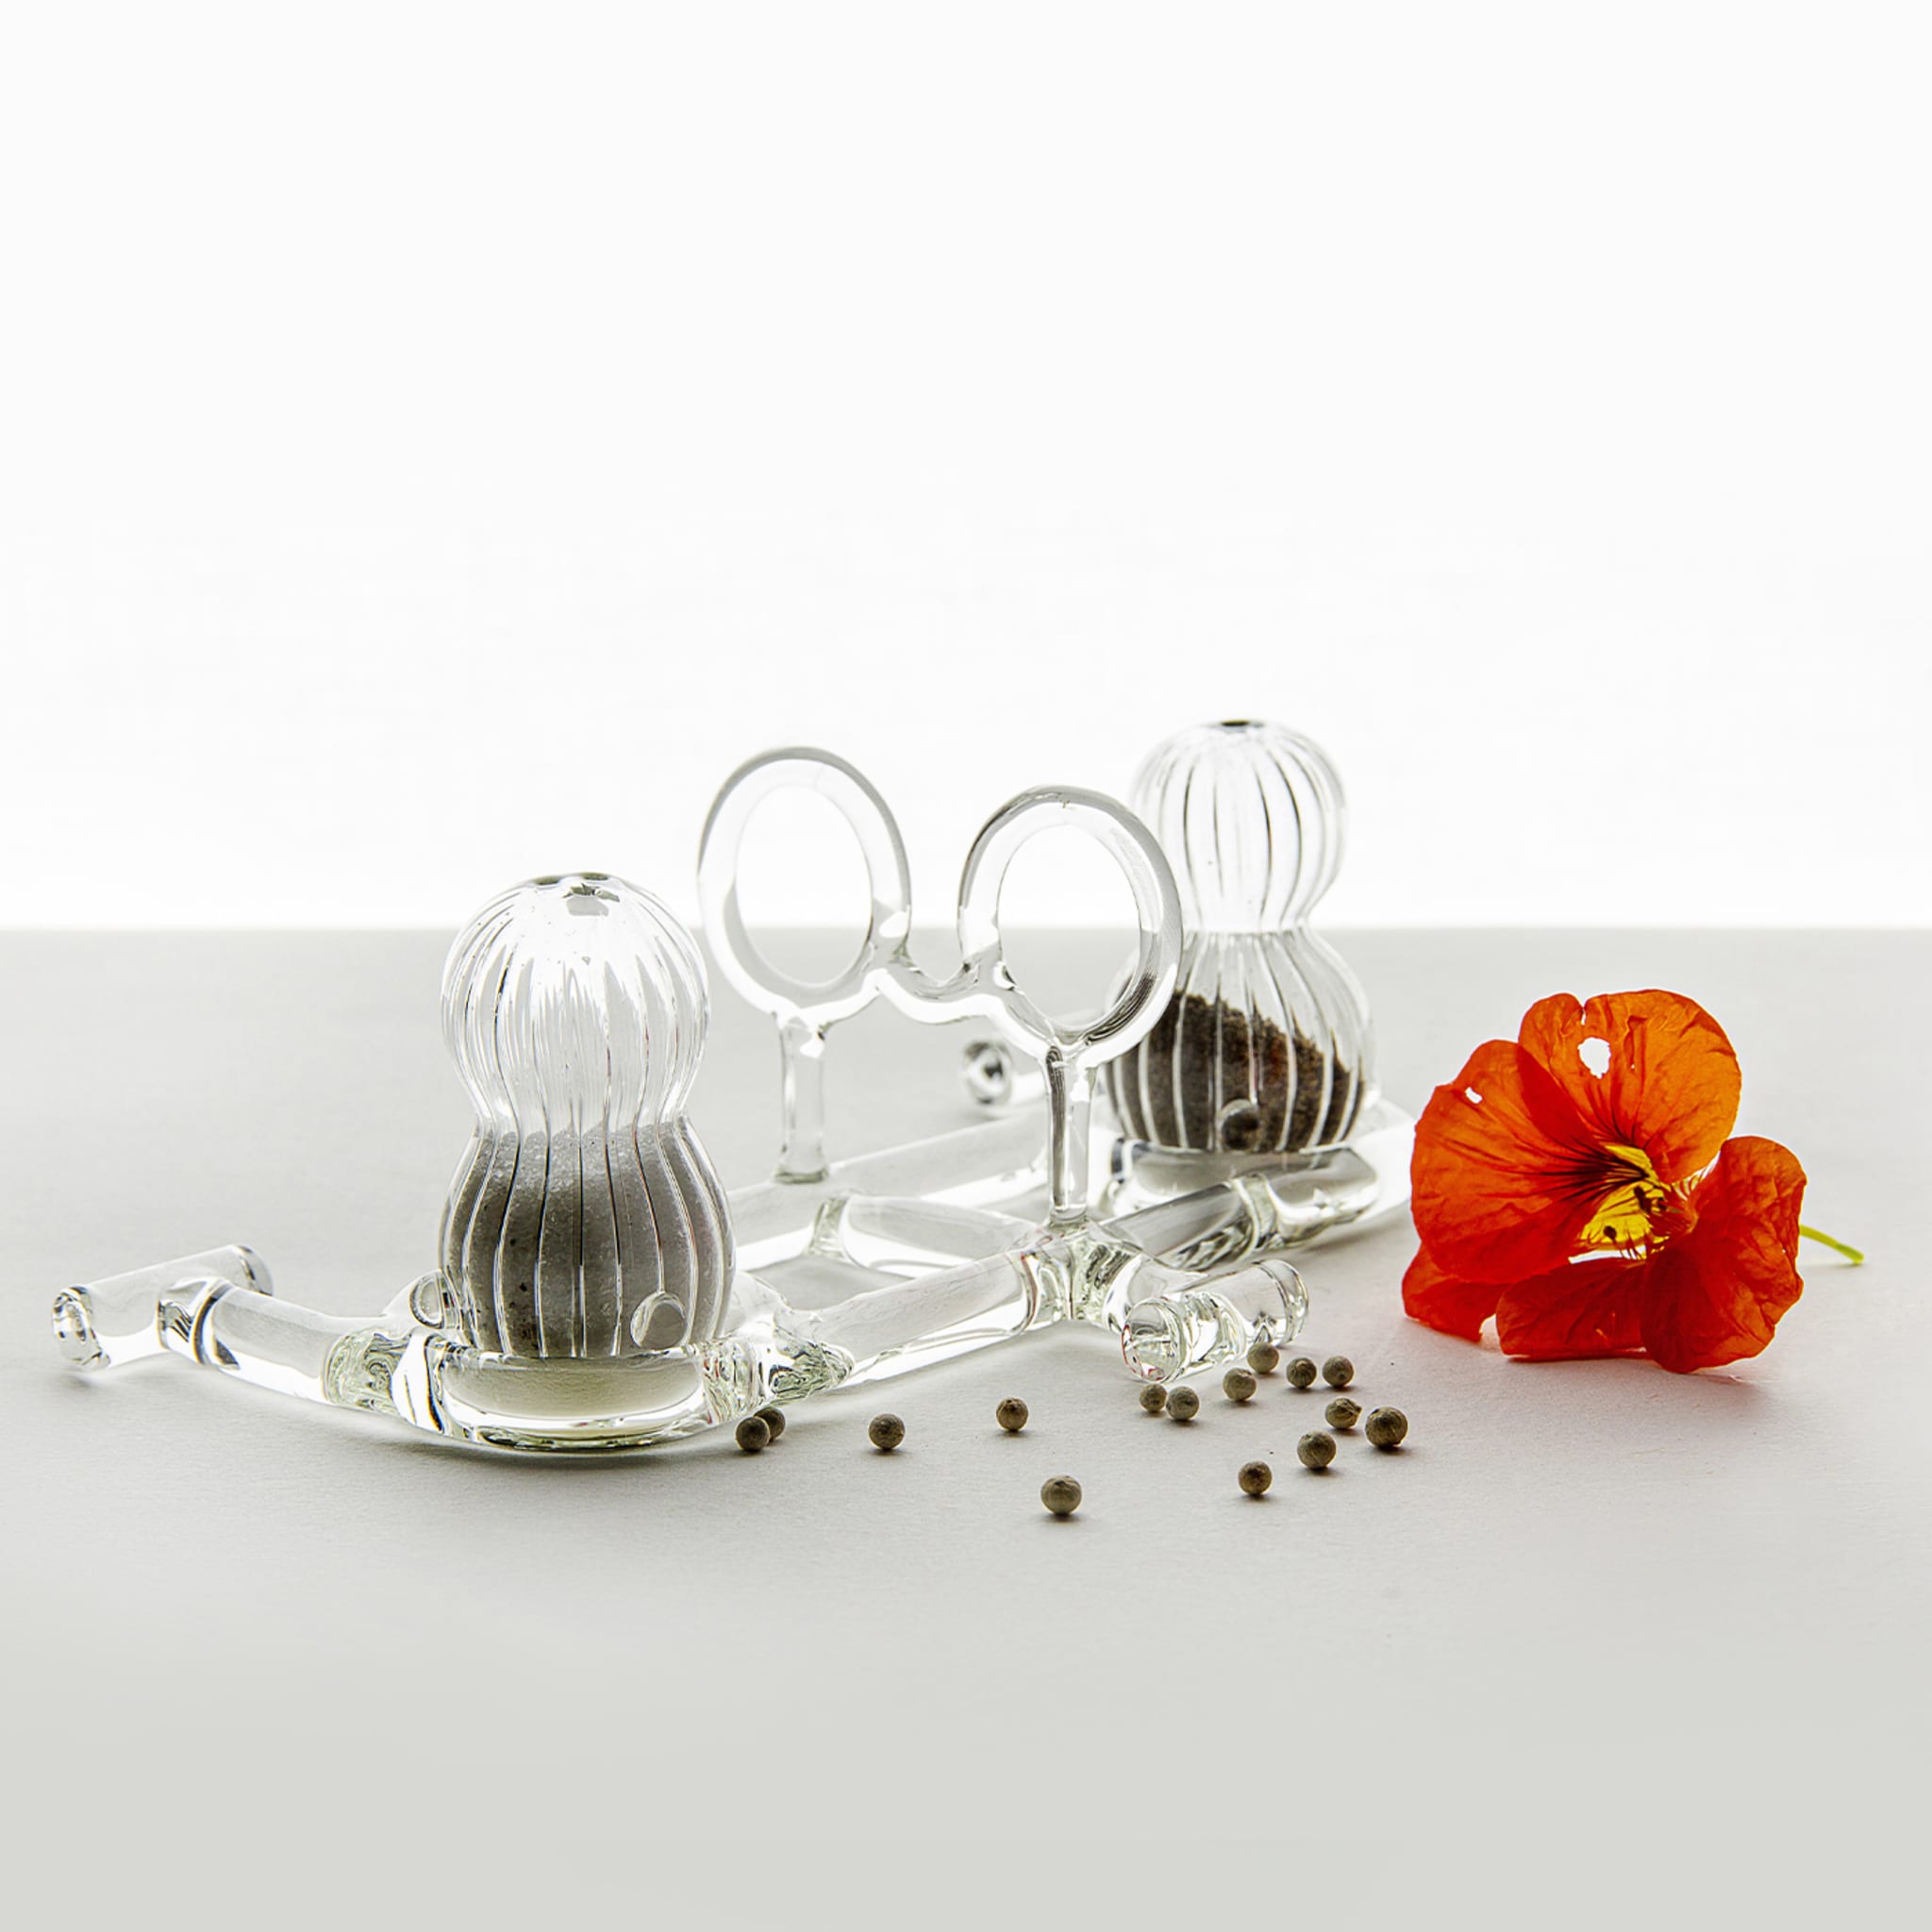 Salt & Pepper - SiO2 Tableware Glass Collection - Alternative view 2